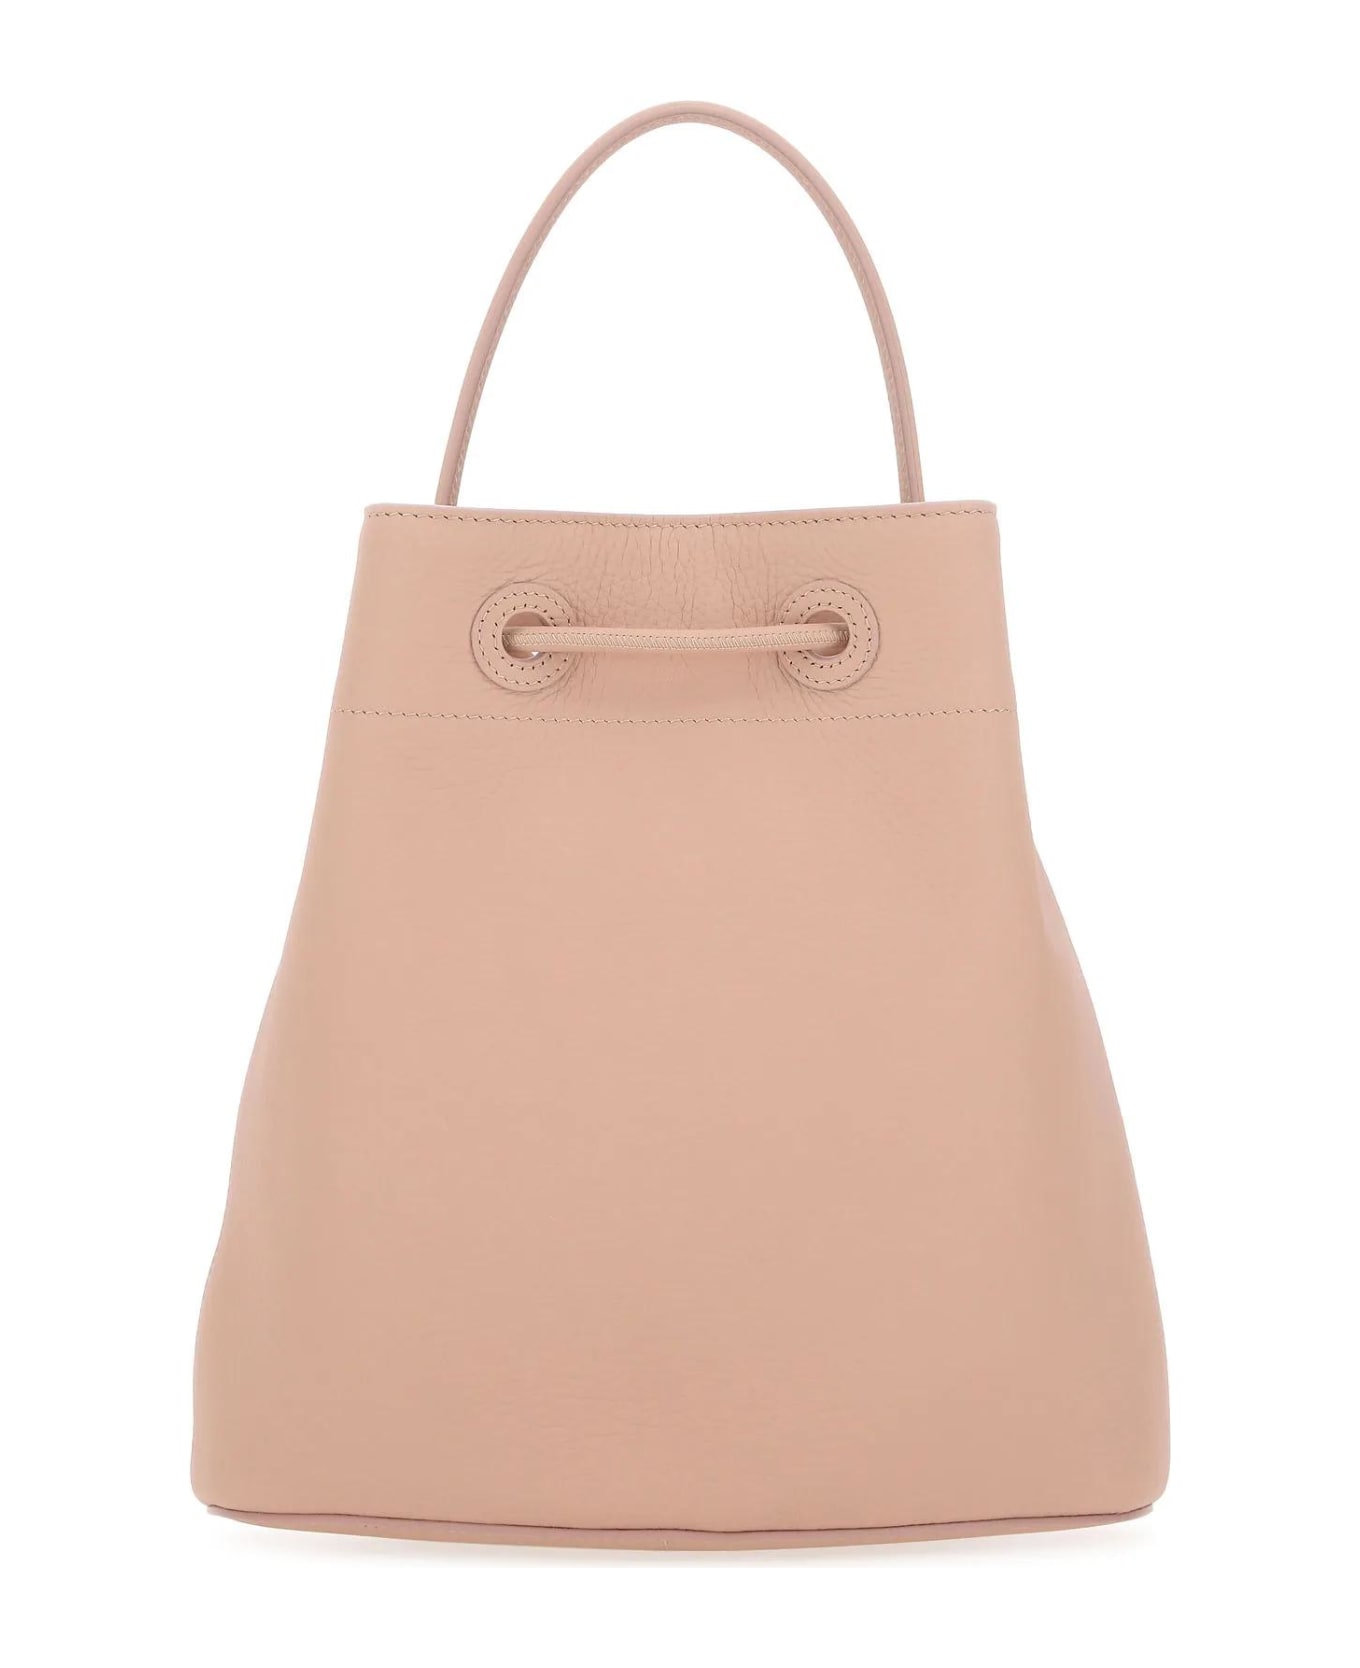 Burberry Pink Leather Small Tb Bucket Bag - A3661 トートバッグ